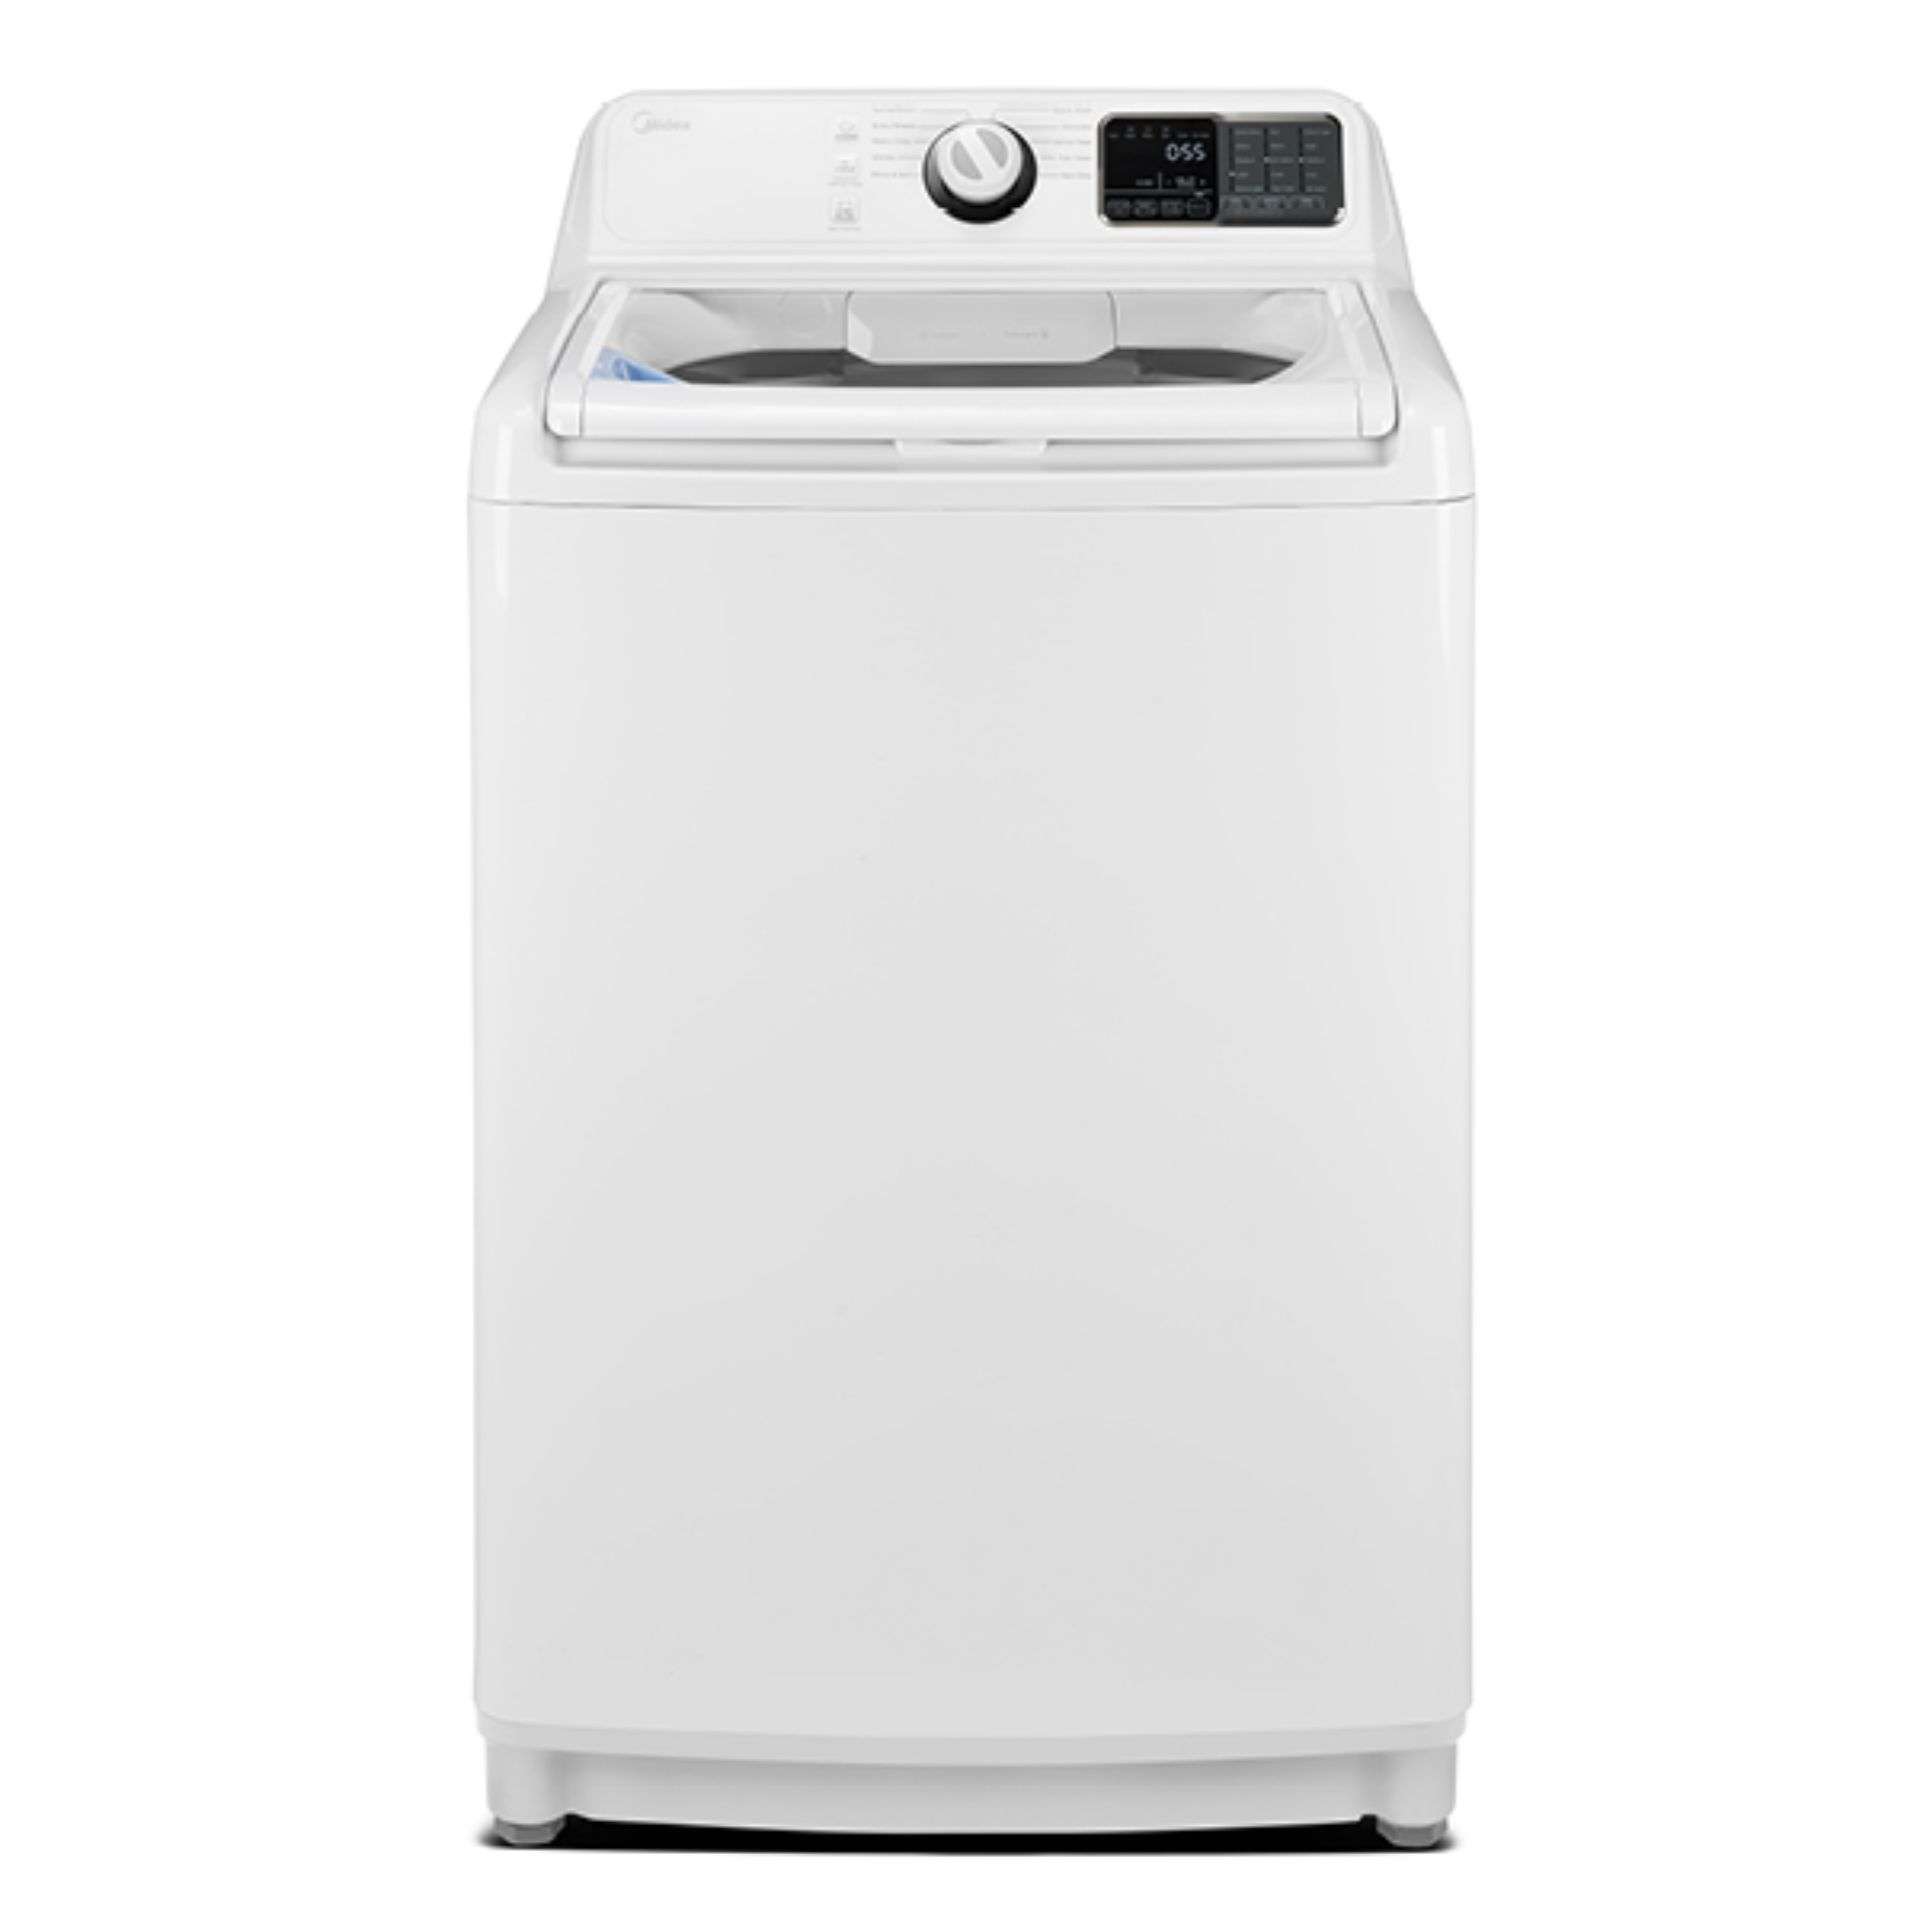 5.2 Cu. Ft. Top Load Washer with Agitator